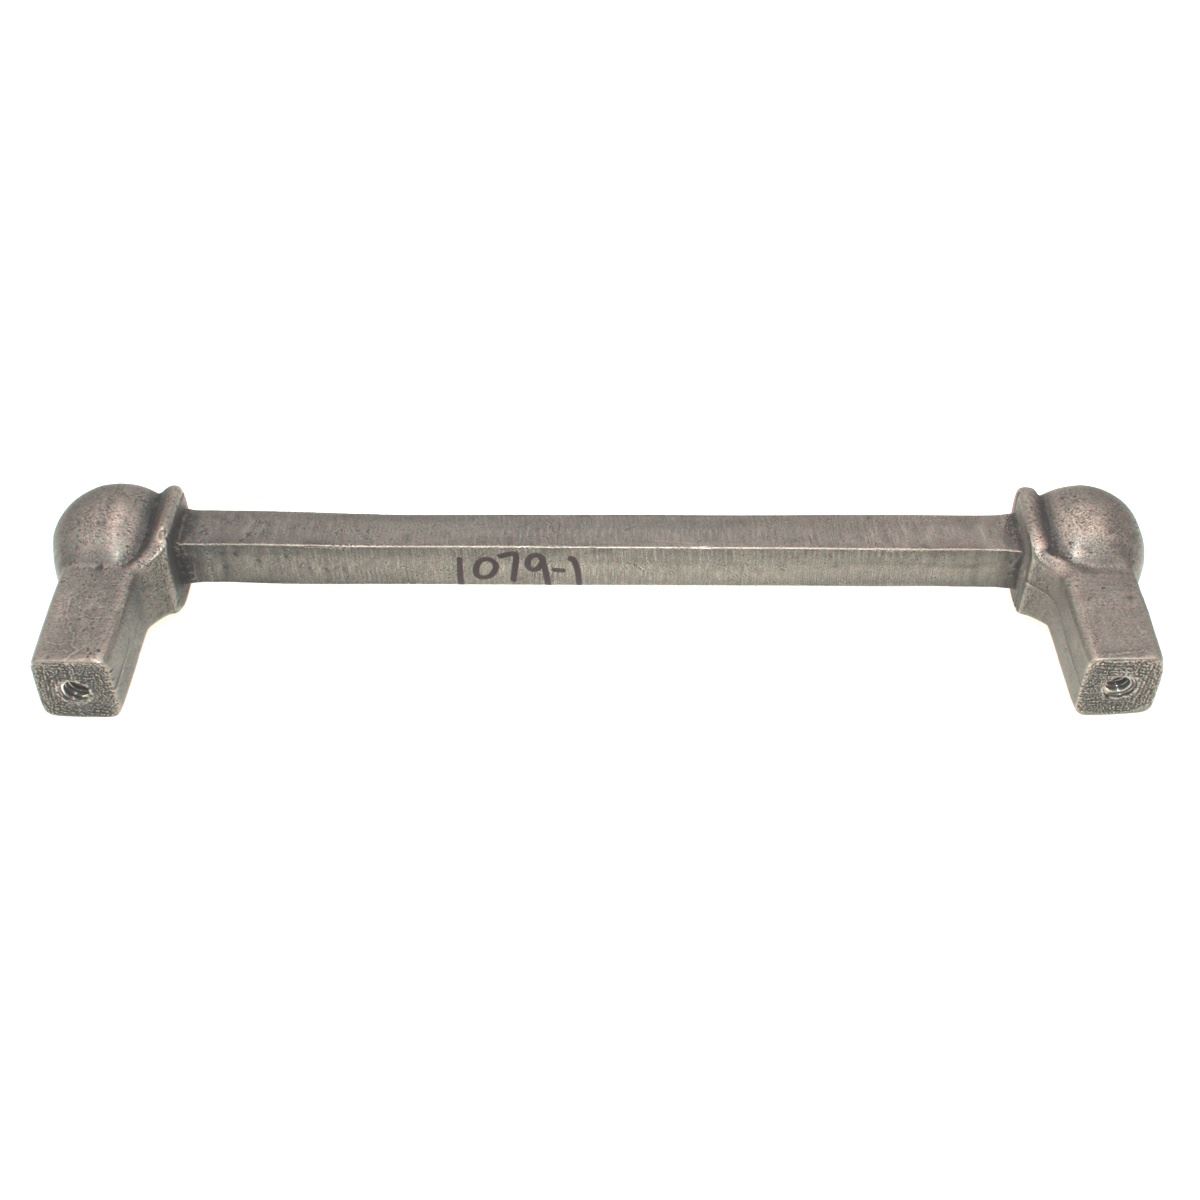 Anne at Home Hardware Une Grande 8" Ctr. Cabinet Bar Pull Pewter Matte 1079-1